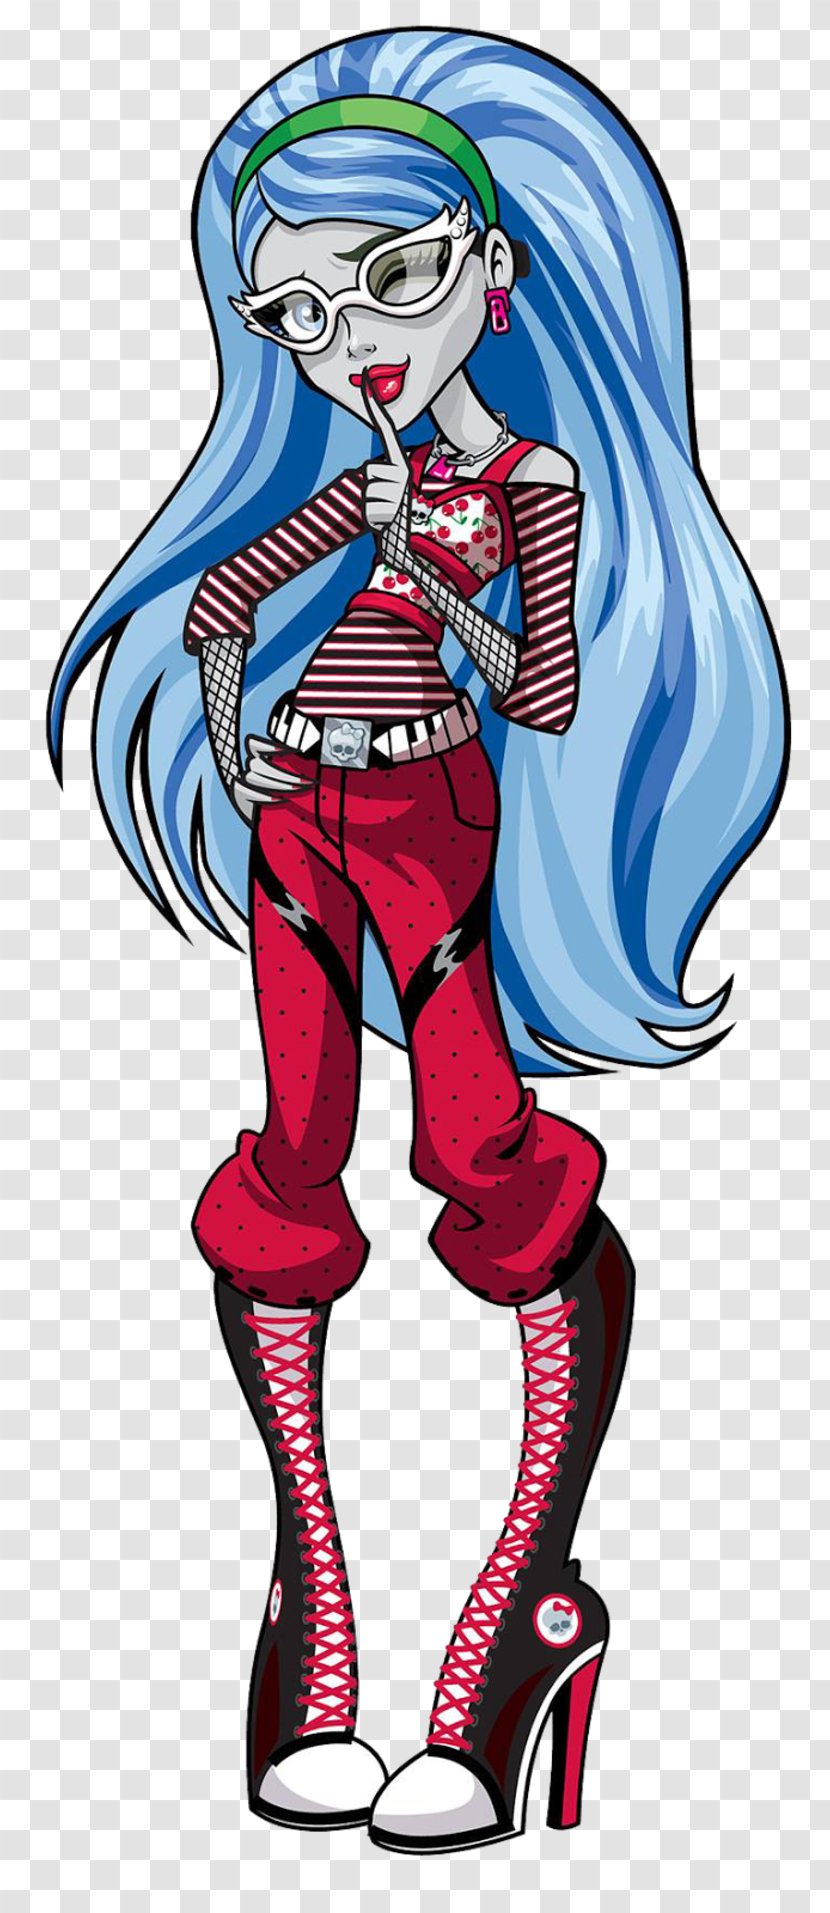 Monster High Ghoulia Yelps Lagoona Blue Frankie Stein - Watercolor - Ghoul Transparent PNG